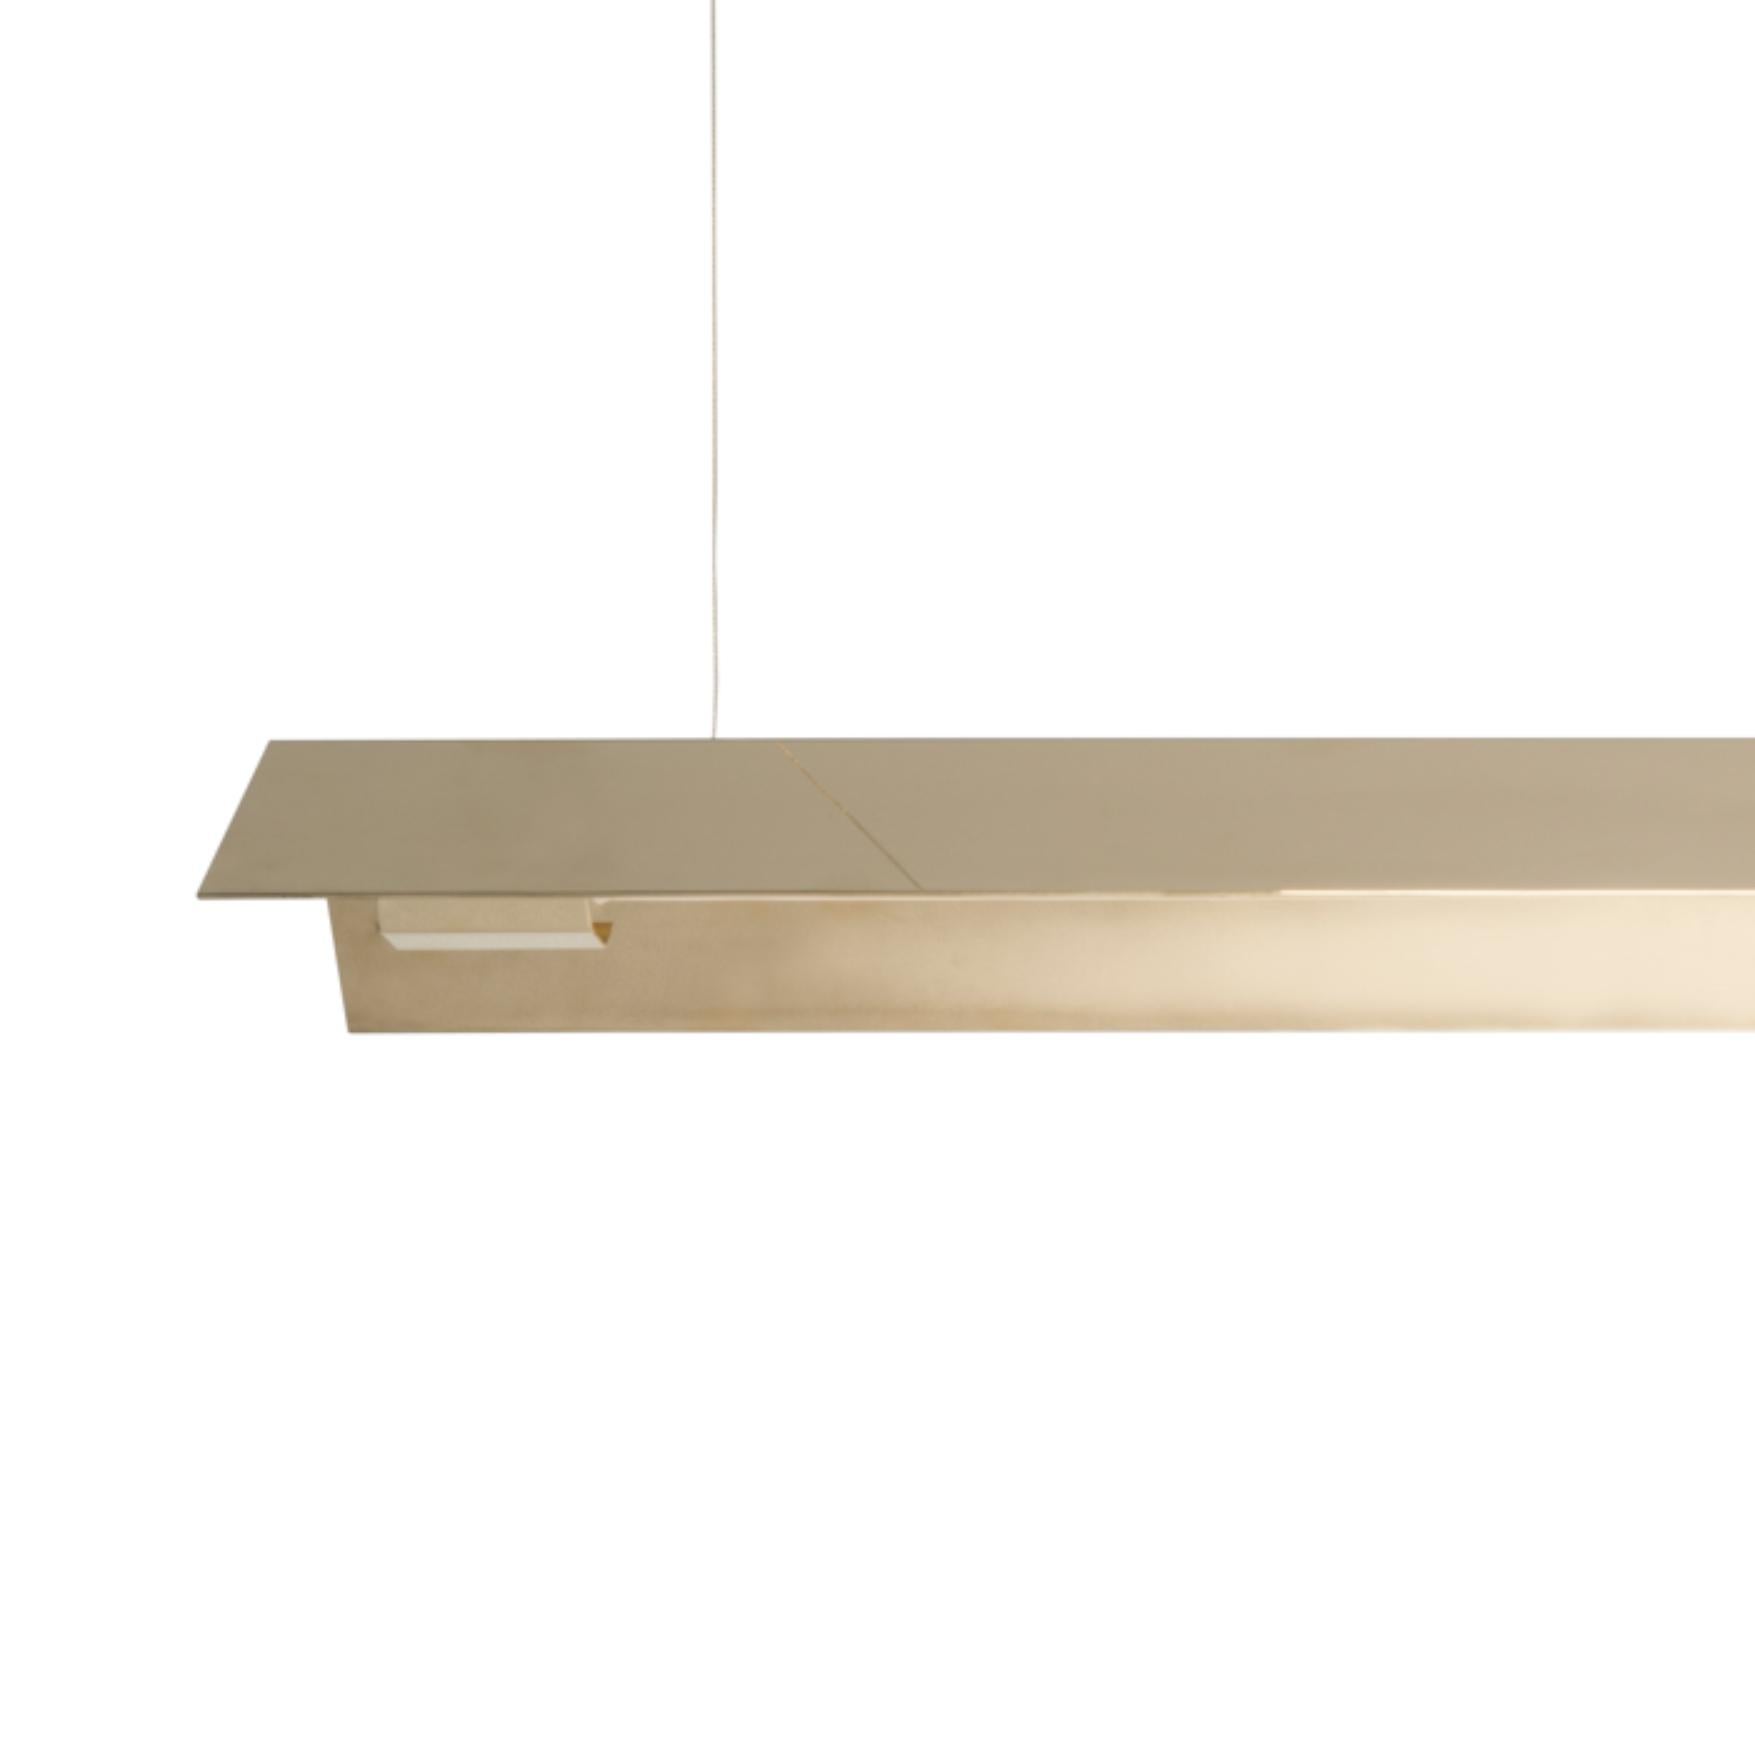 Large Misalliance solid brass suspended light by Lexavala
Dimensions: D 16 x W 130 x H 8 cm
Materials: Brass.

There are two lenghts of socket covers, extending over the LED. Two short are to be found in Suspended and Surface, and one long in